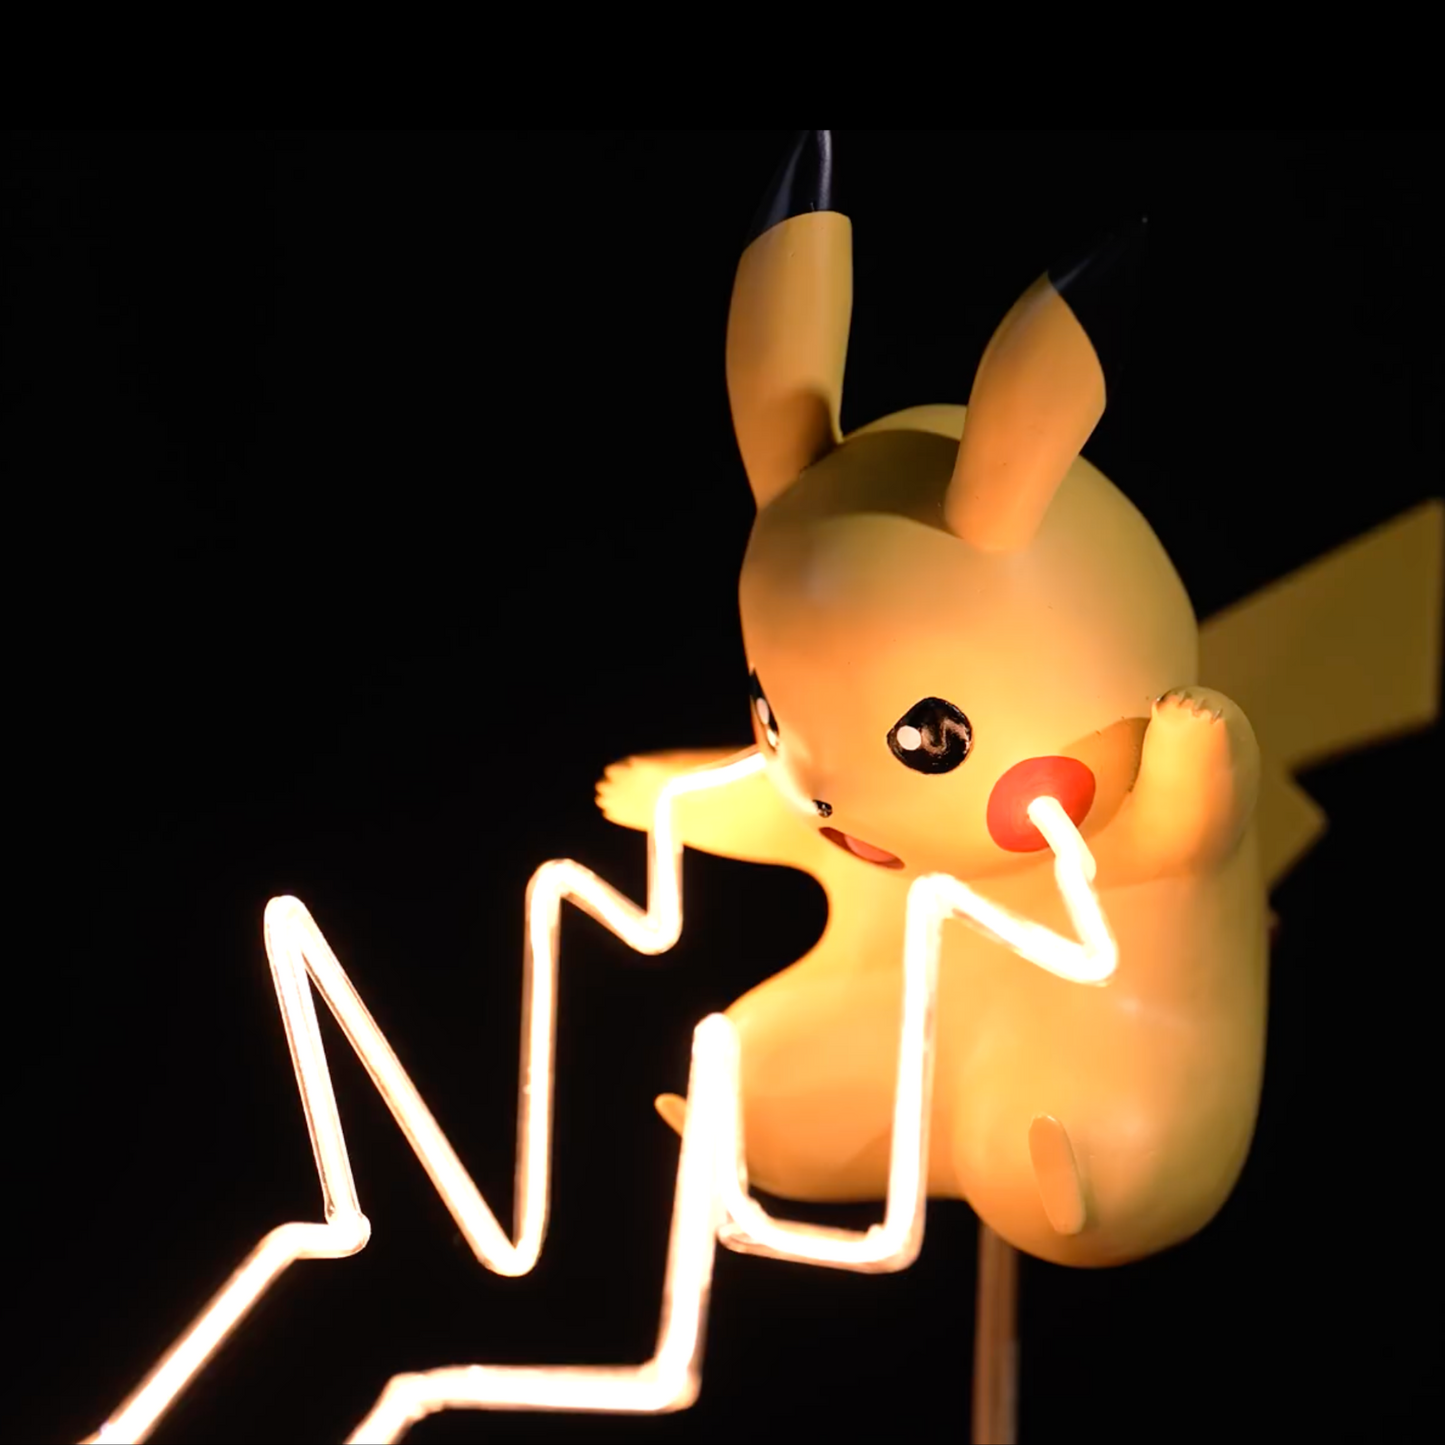 Main image - Pikachu Pokemon wireless charger with thunderbolt lightning LED lights | Perfect as a night light lamp decor gift for Pokémon fans.